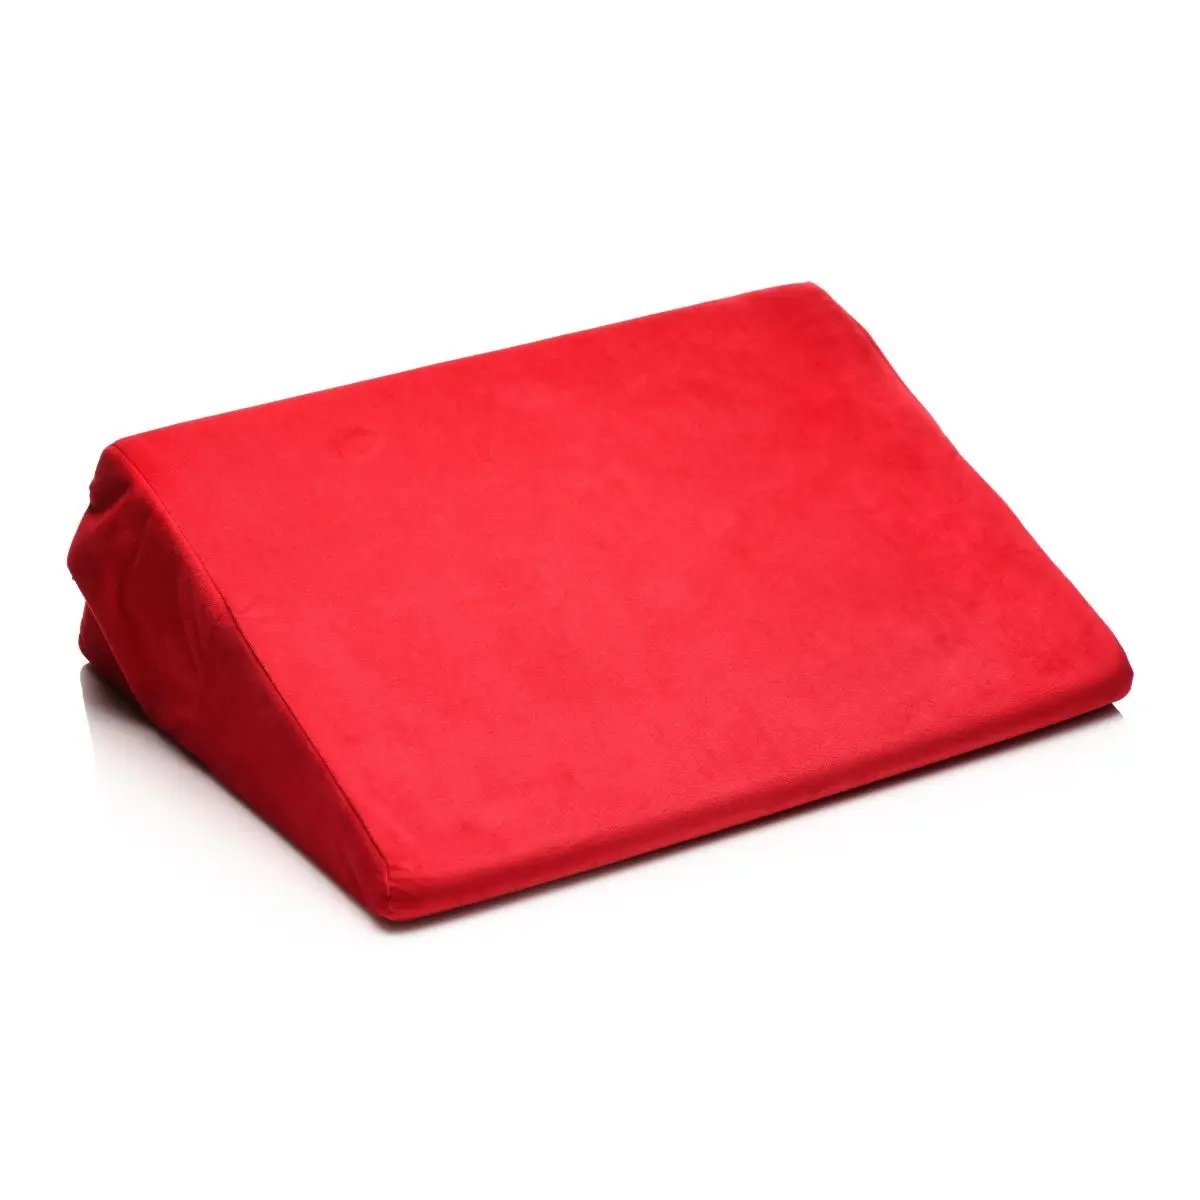 Bedroom Bliss Love Cushion Red - Simply Pleasure